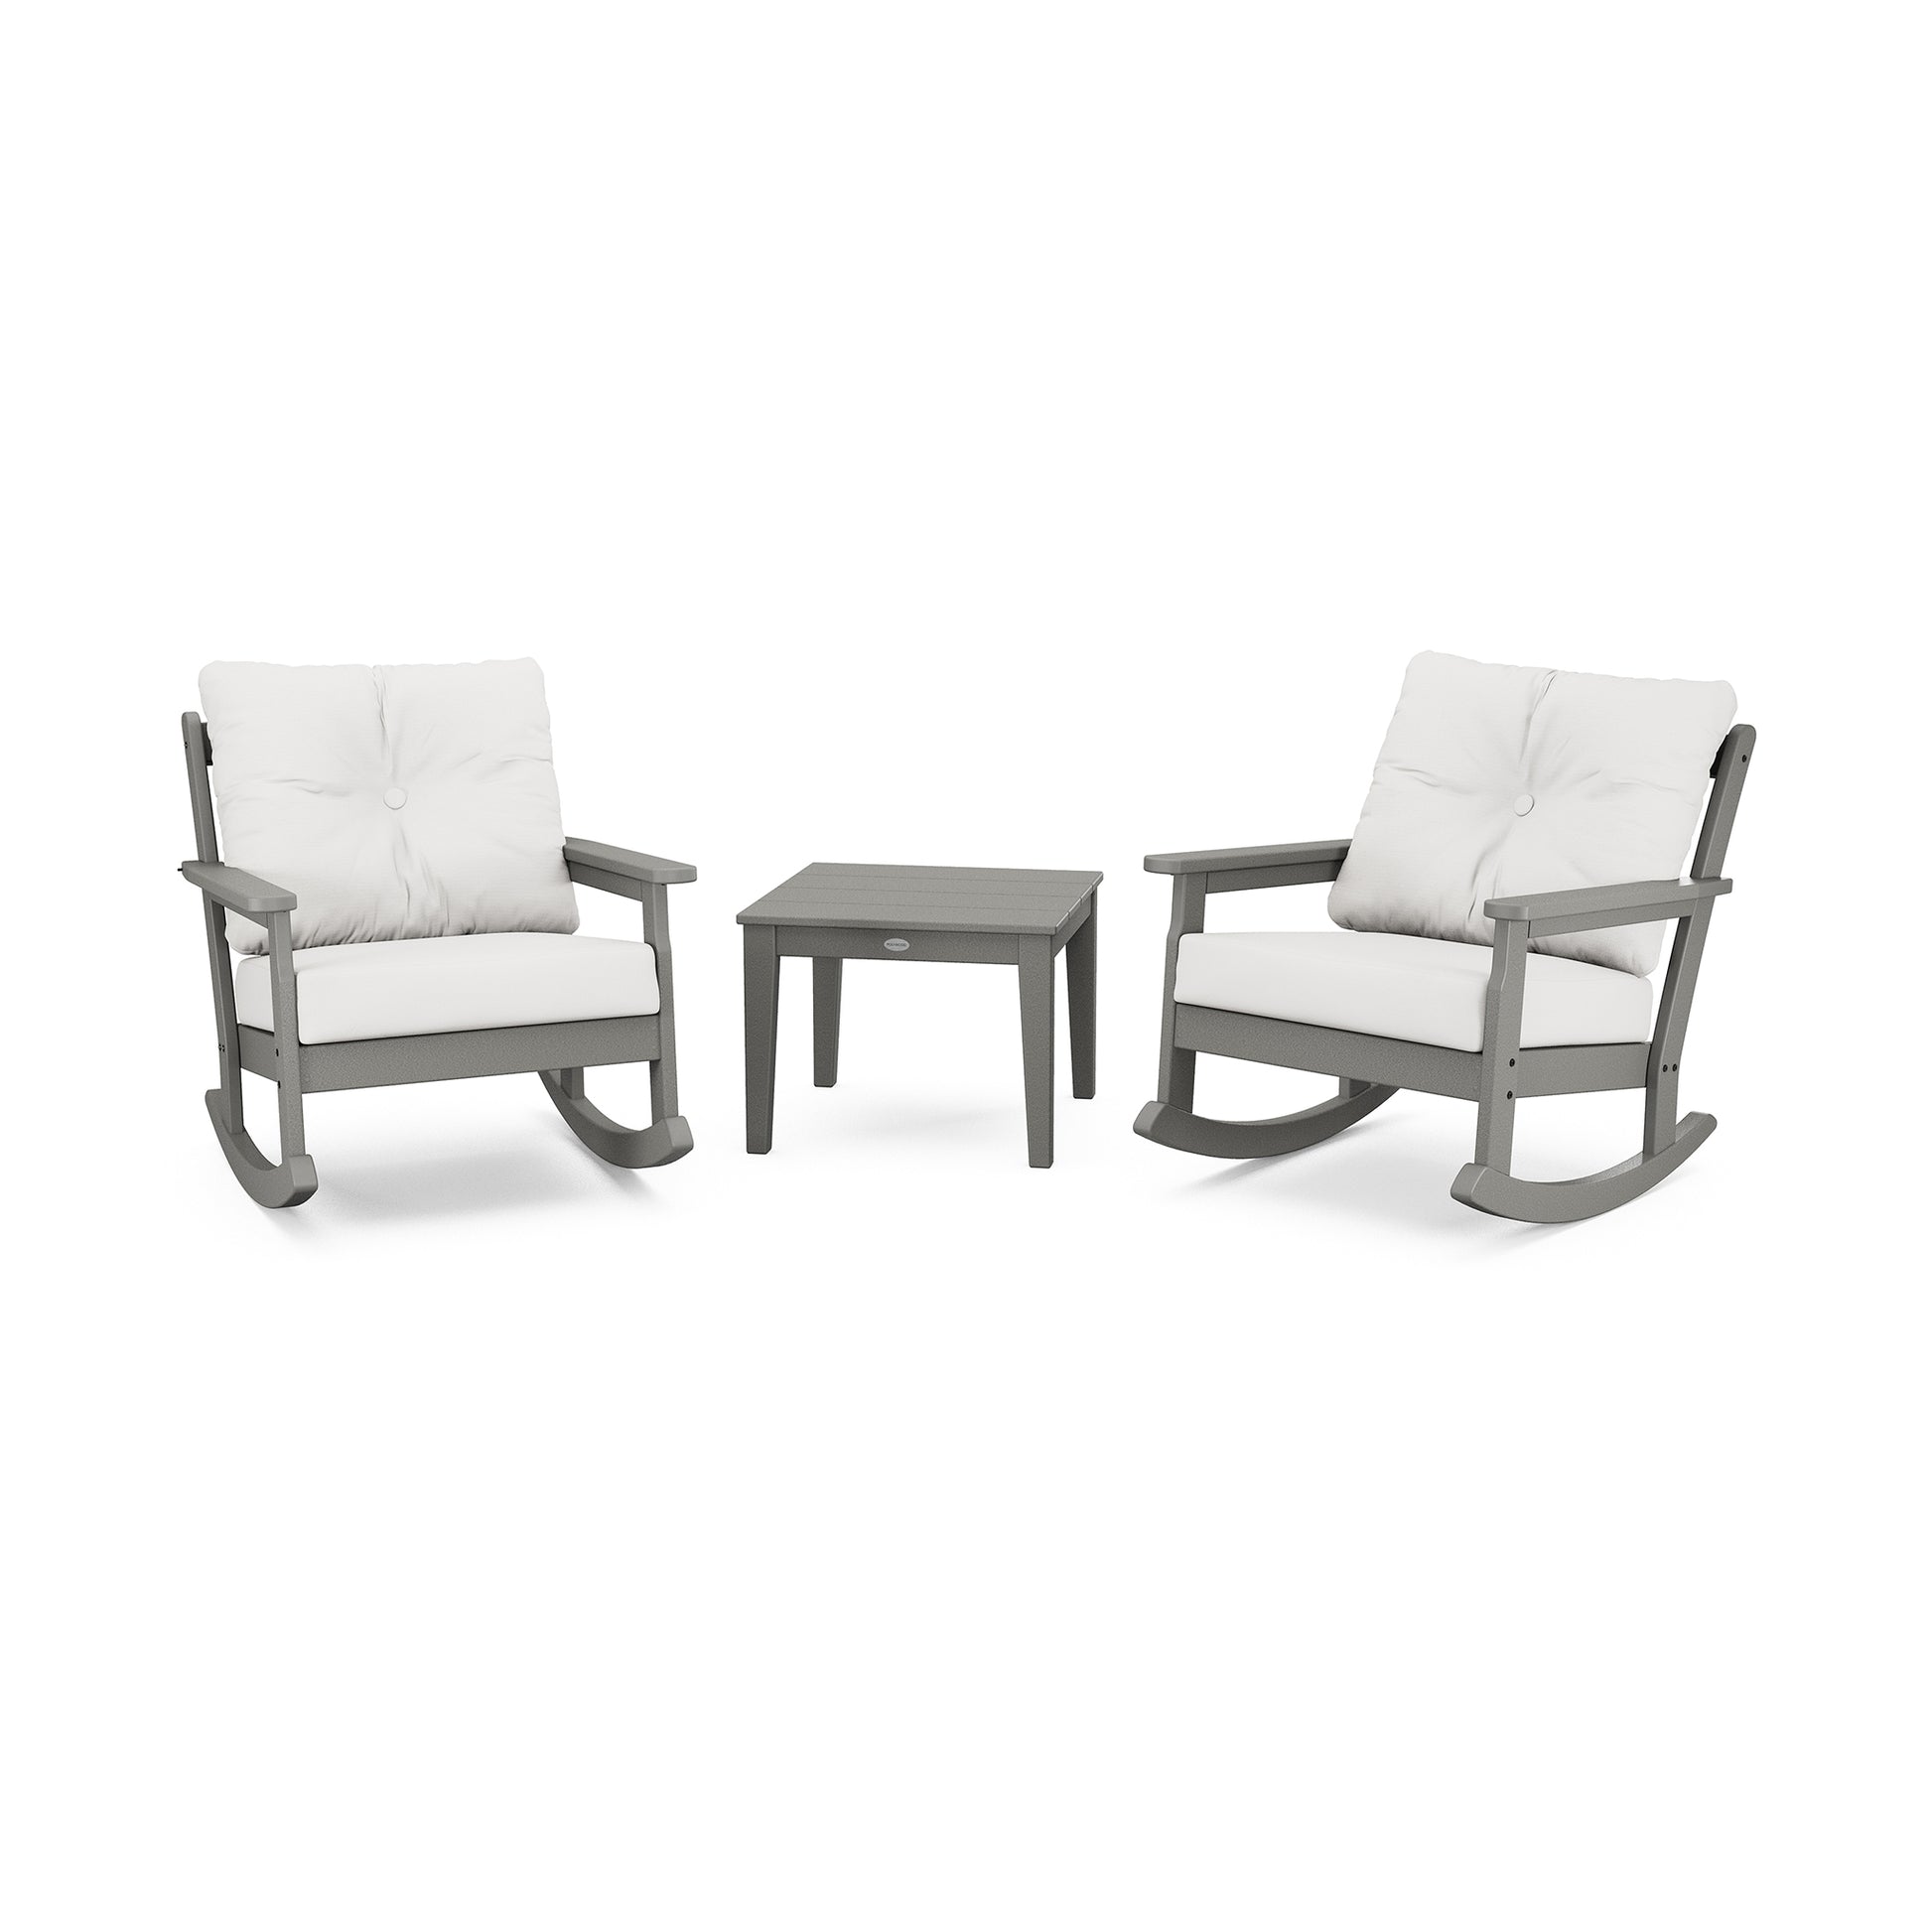 Two gray POLYWOOD Vineyard 3-Piece Deep Seating Rocker Sets with white cushions and a matching gray side table on a white background.